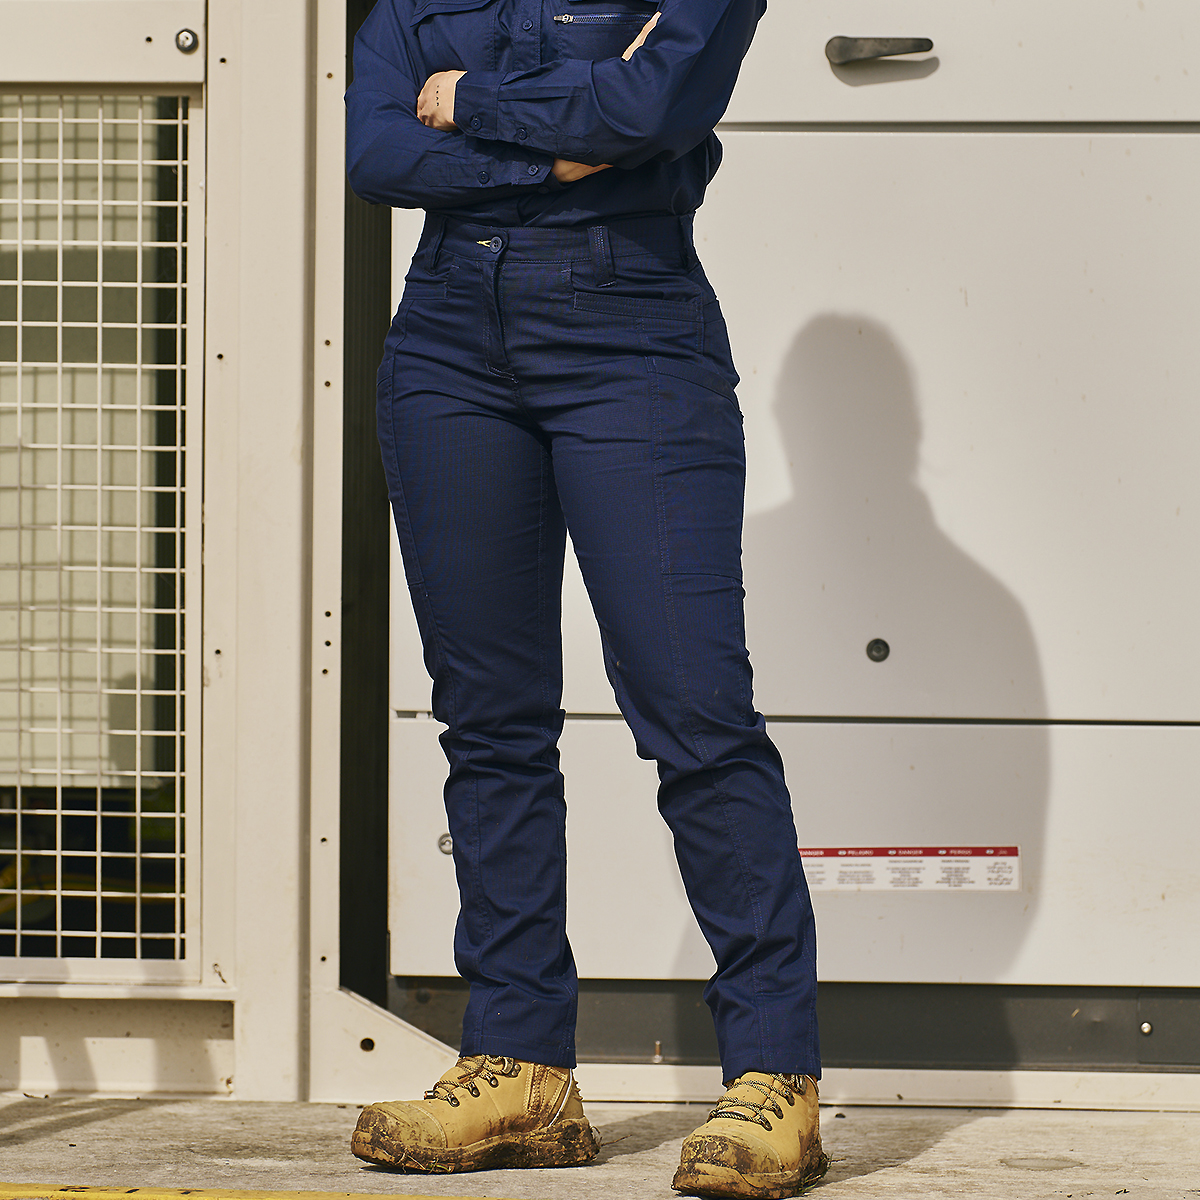 Finding the right pair of womens tradie pants for work is easy at the Workers Shop!